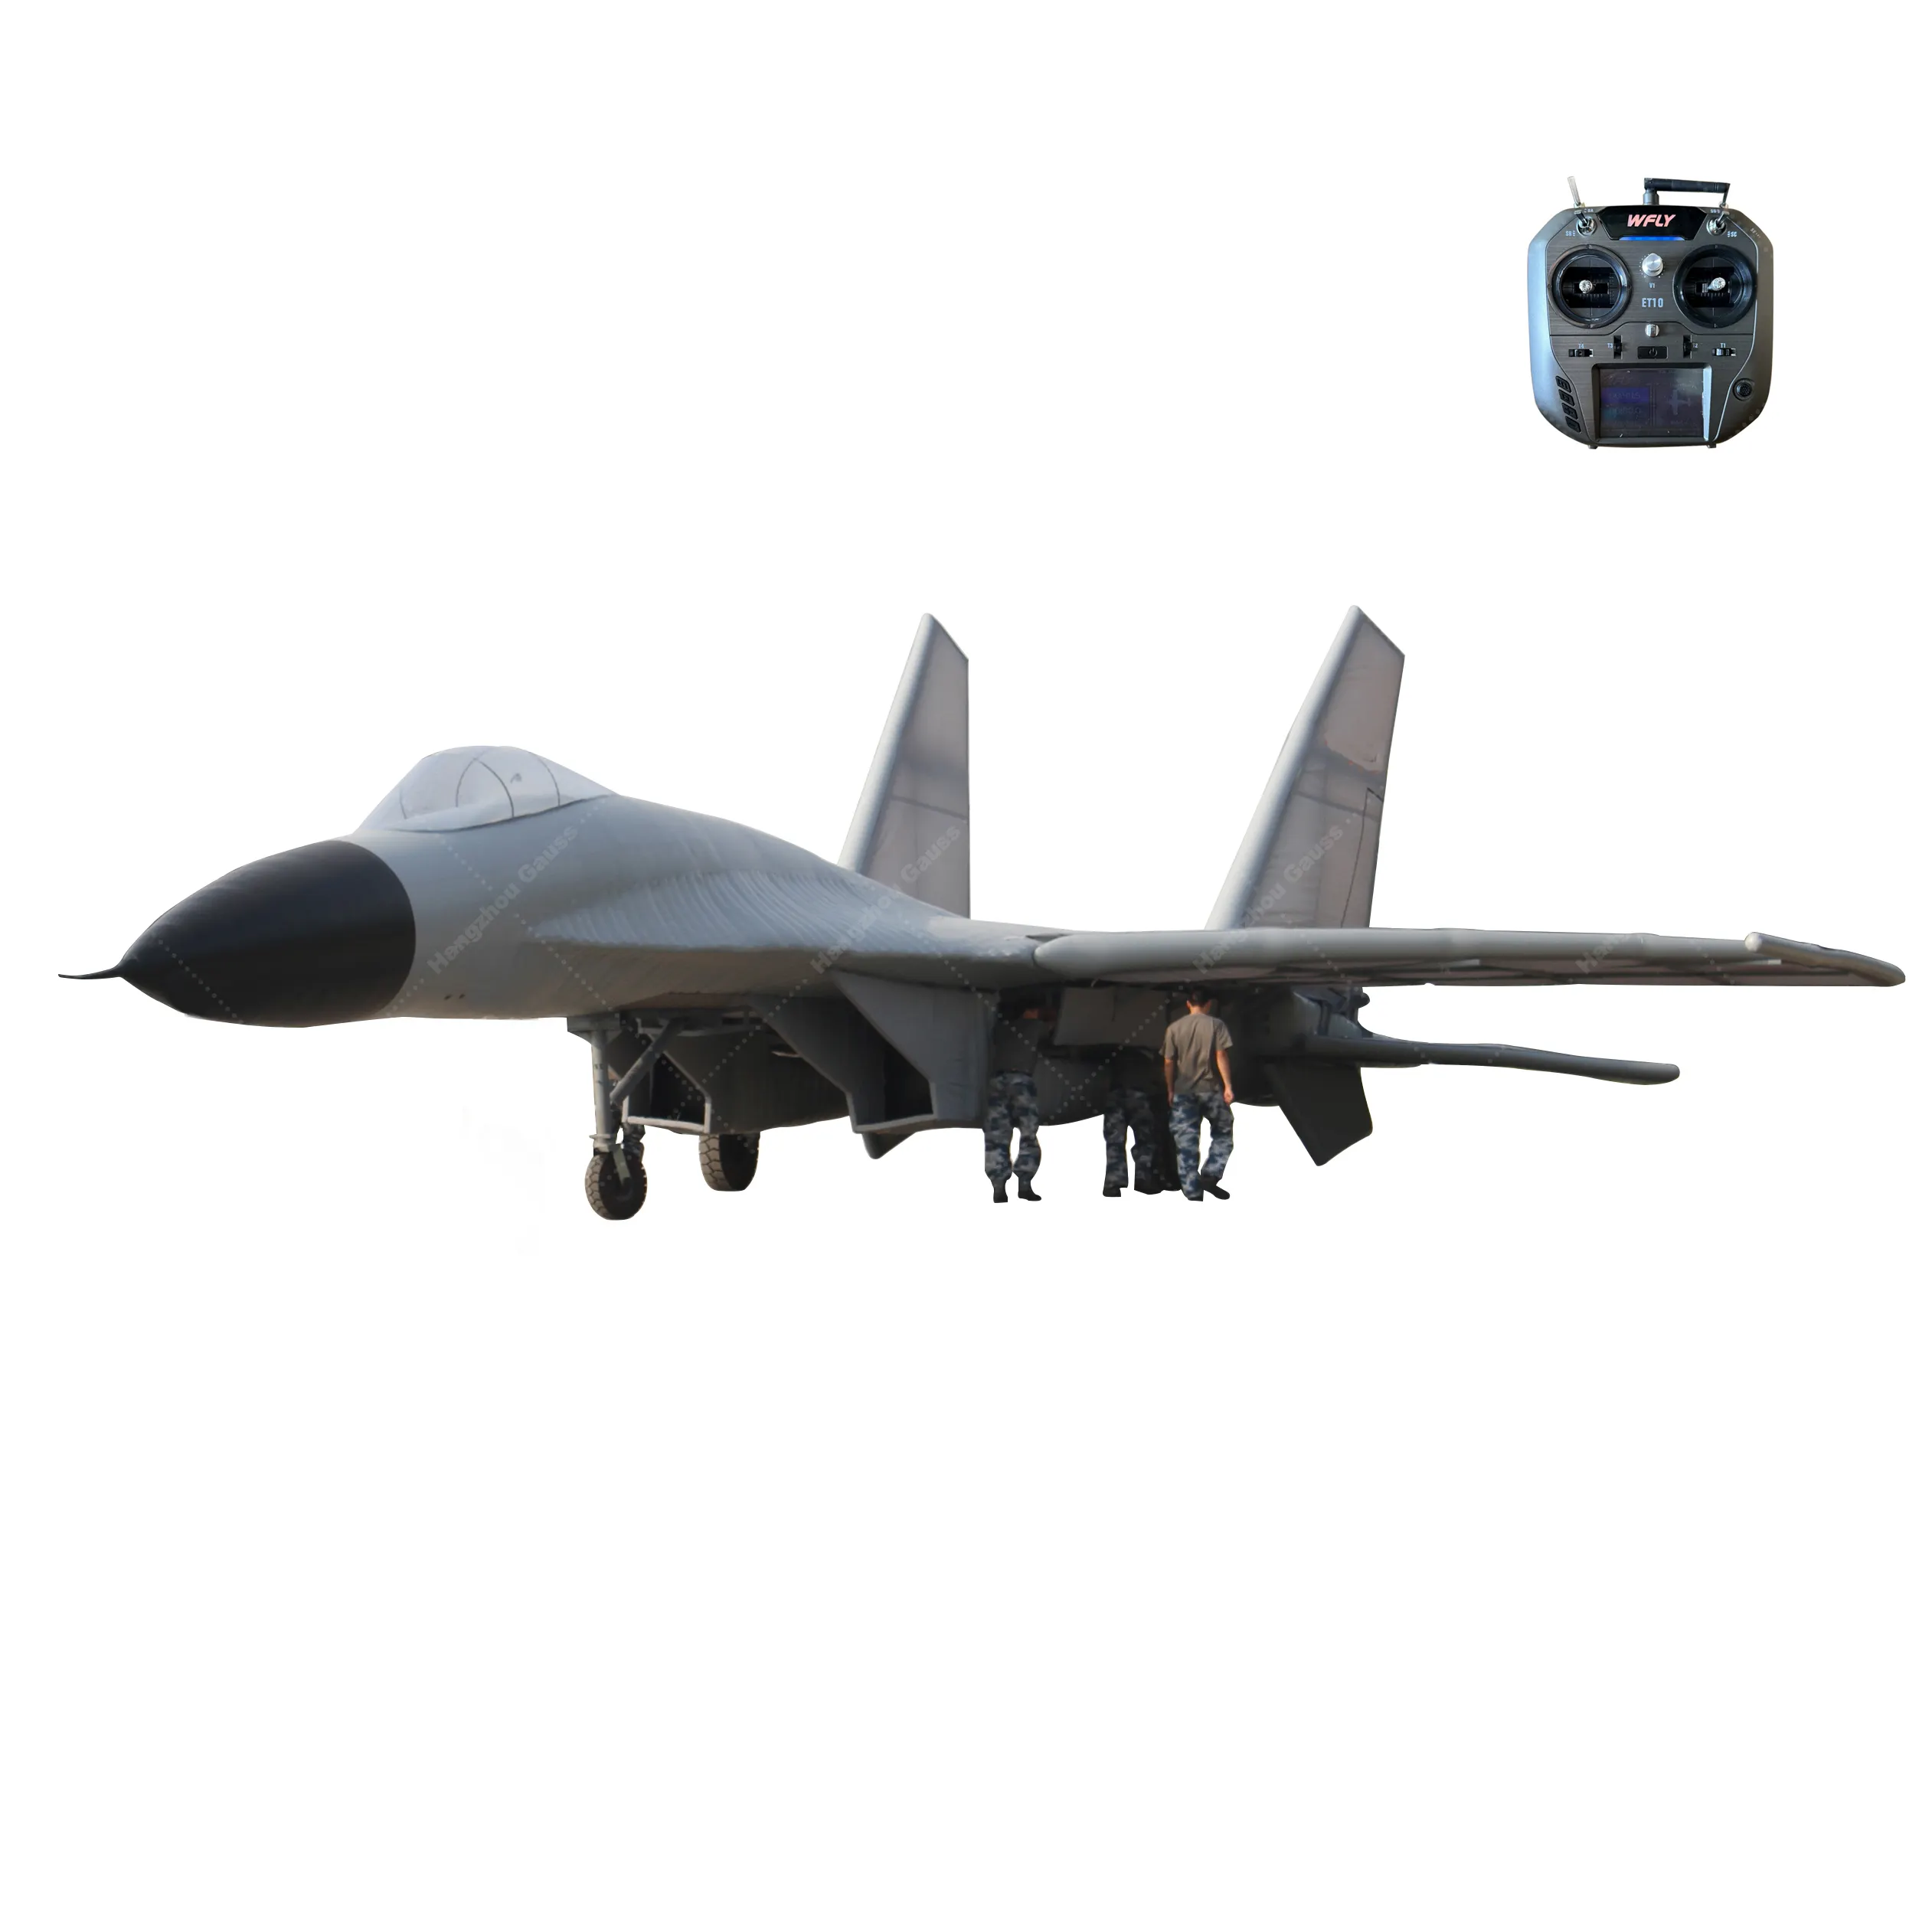 China Factory Inflatable Mobile Fighter Model of su-27 Plane Fighter Jet Decoy Real Size